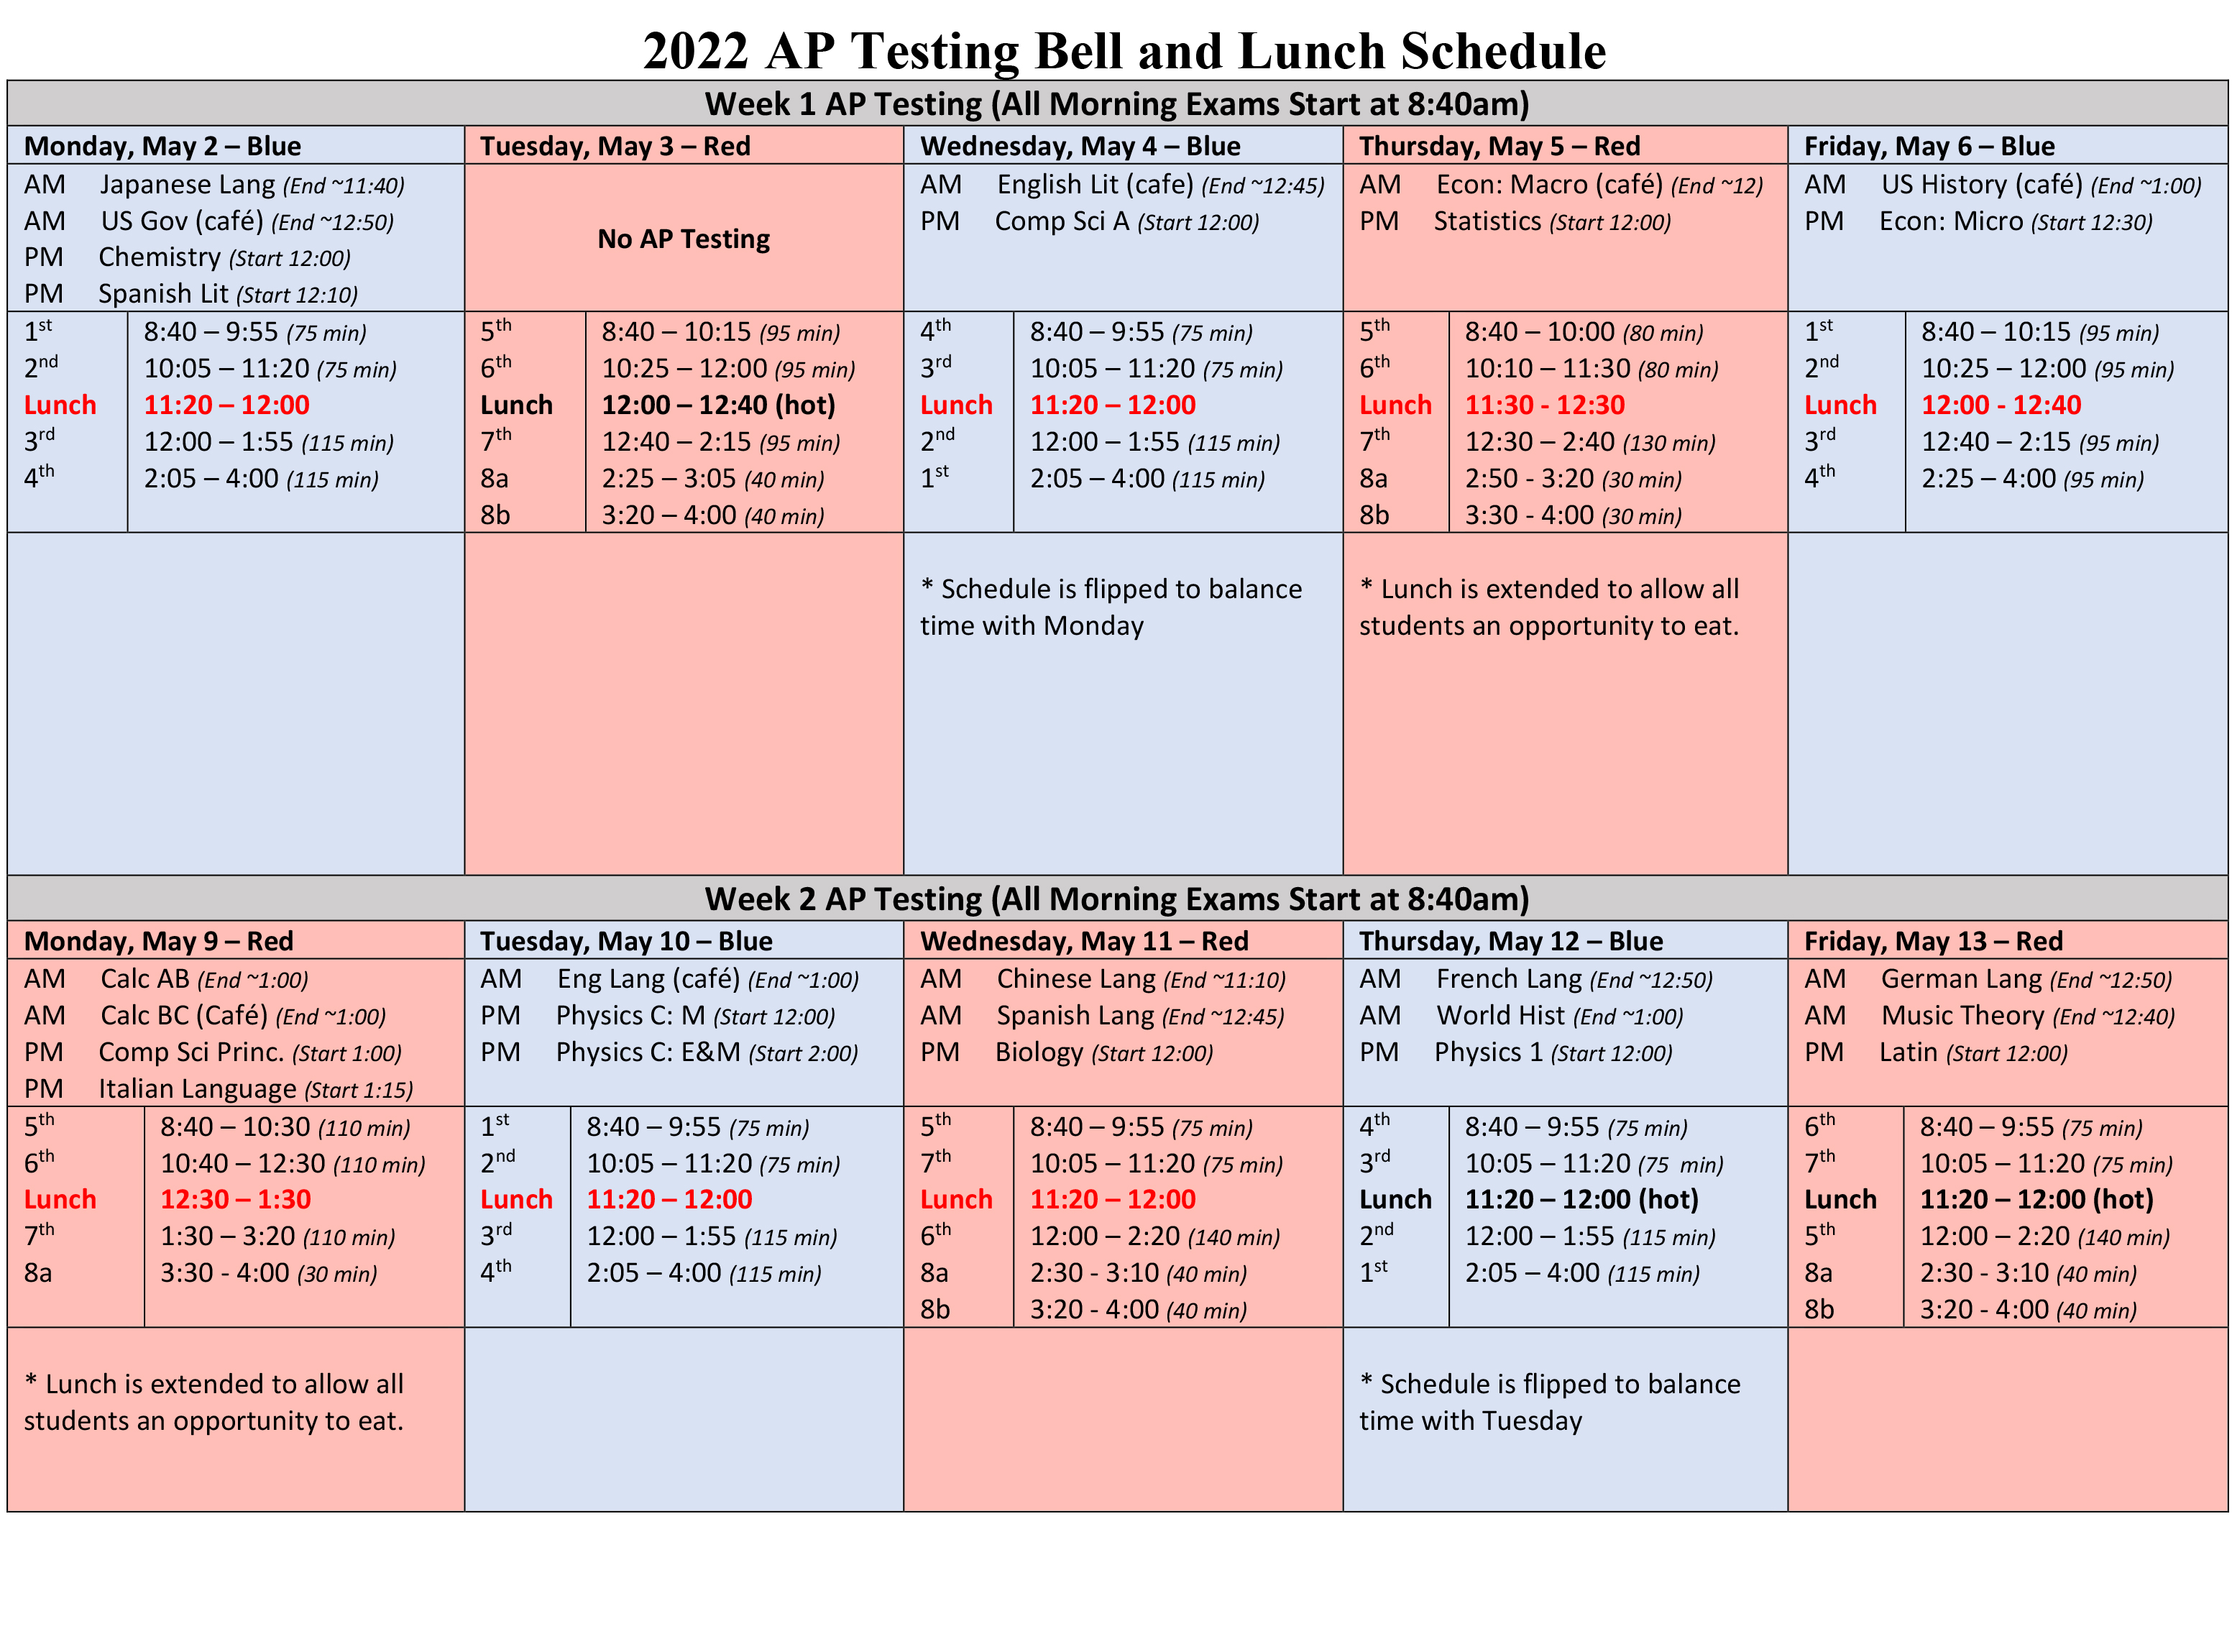 AP Testing Schedule 2022 Thomas Jefferson High School for Science and